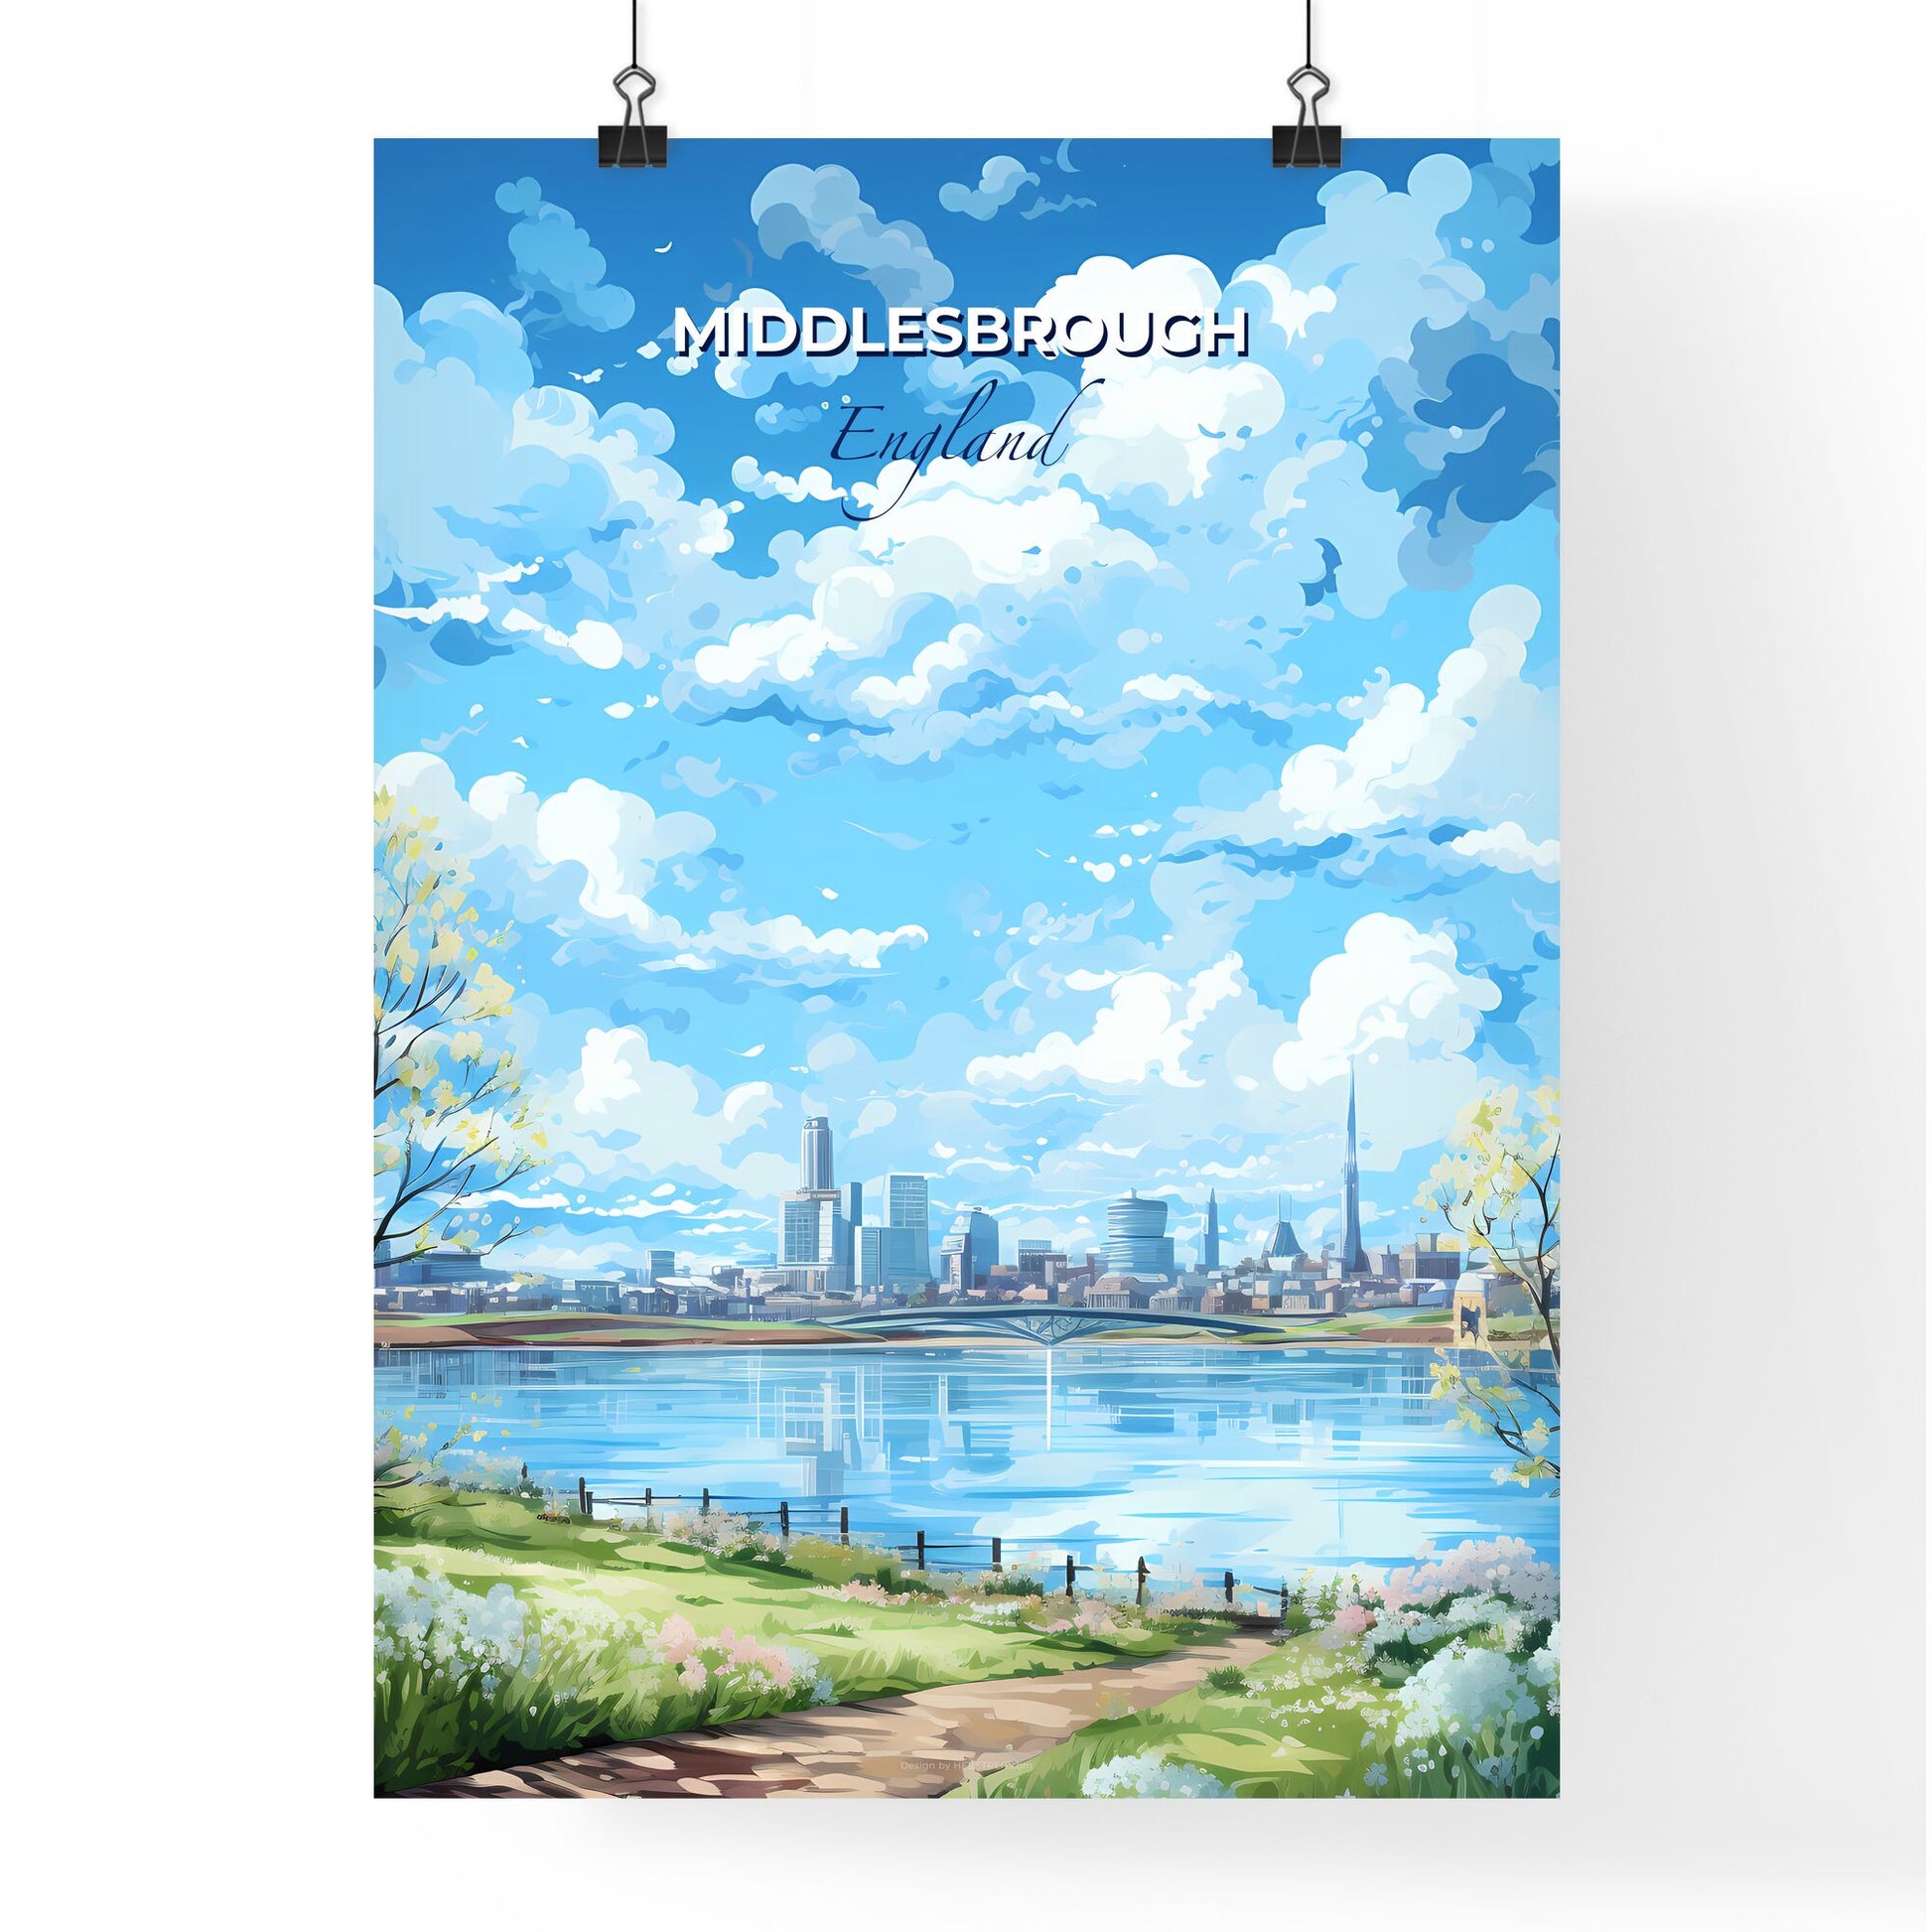 Middlesbrough England Skyline - A Water Body With Trees And A City In The Background - Customizable Travel Gift Default Title